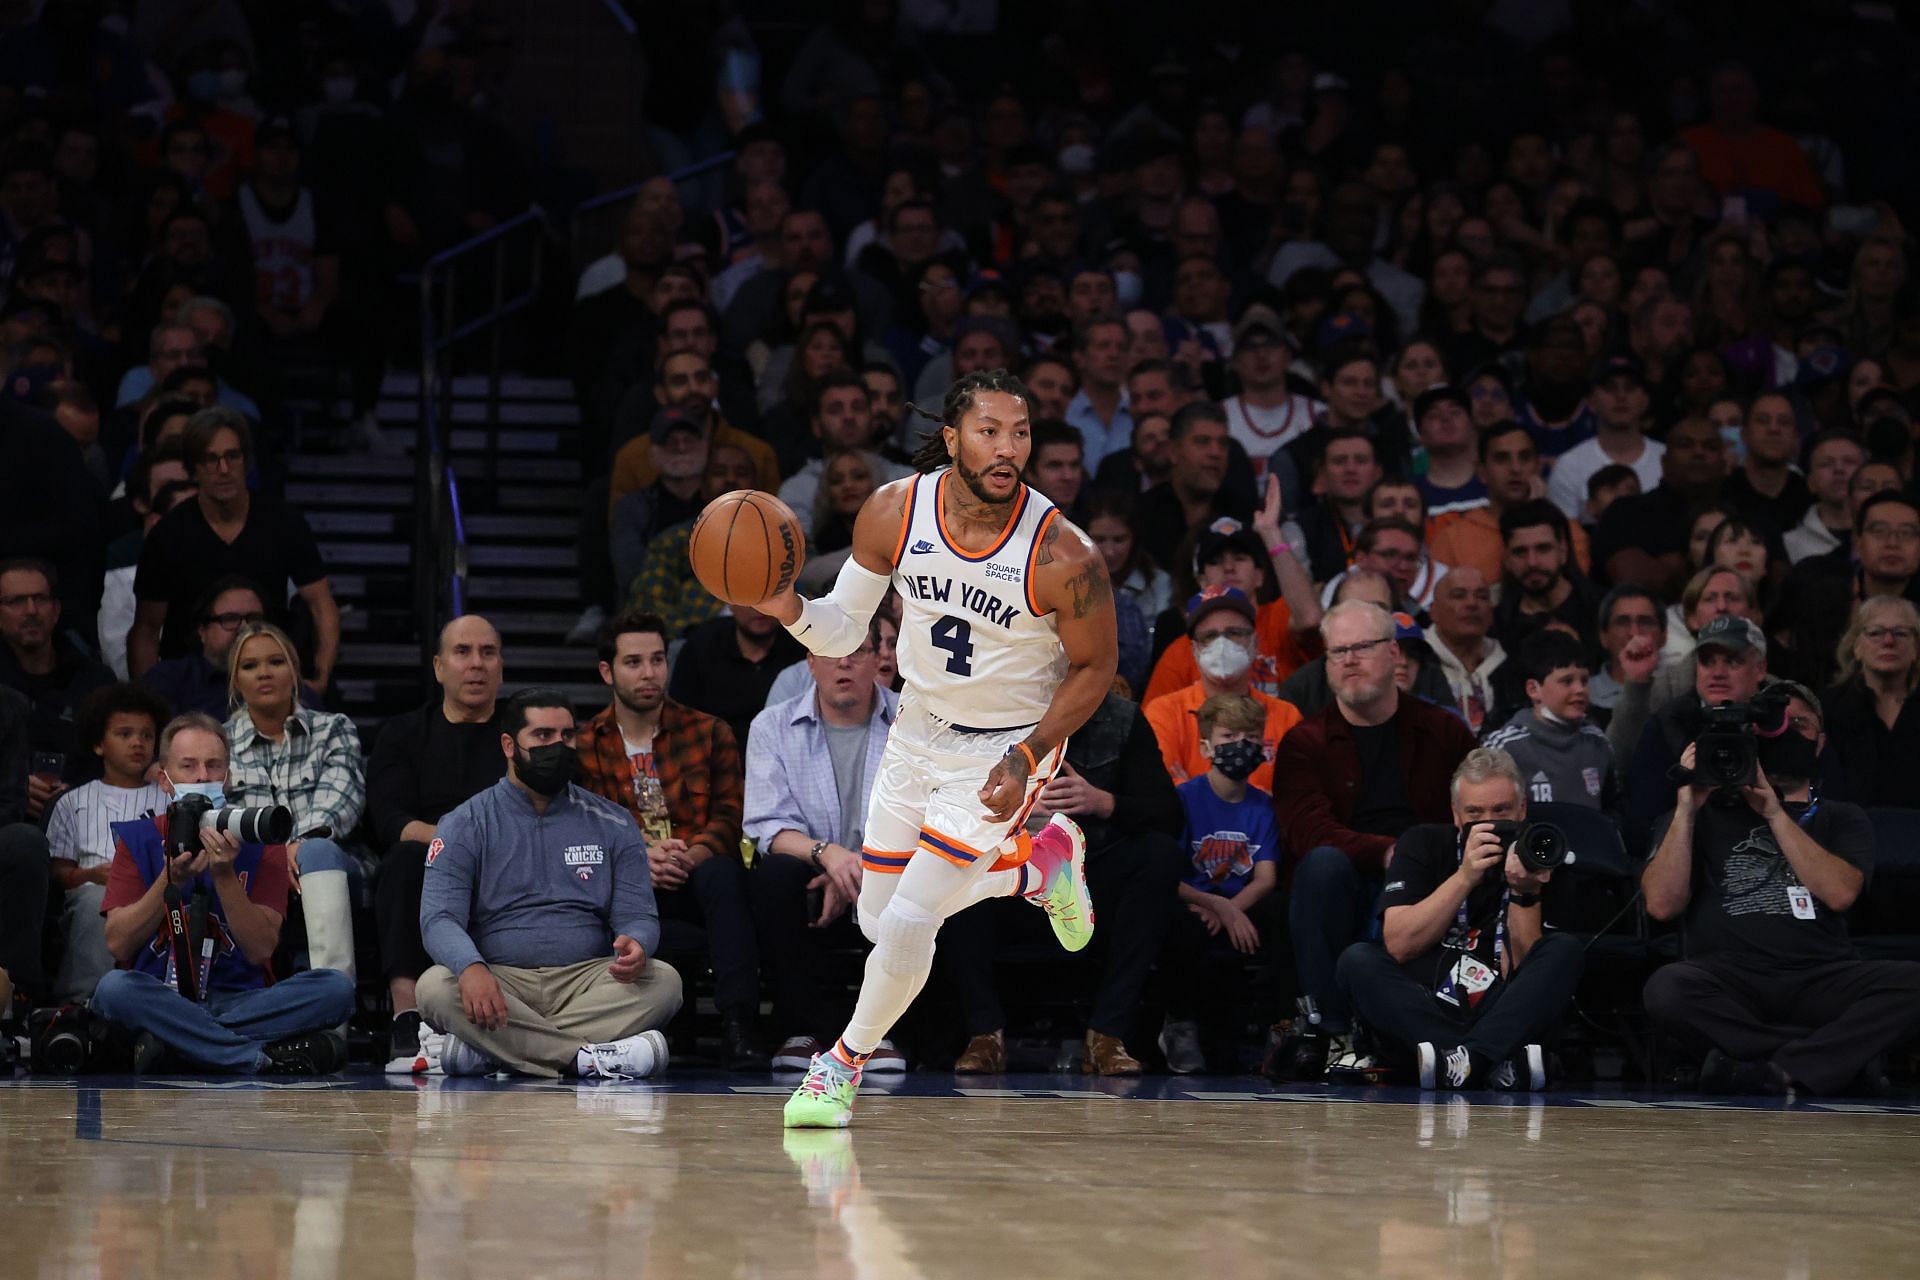 Derrick Rose brings the ball up for the New York Knicks